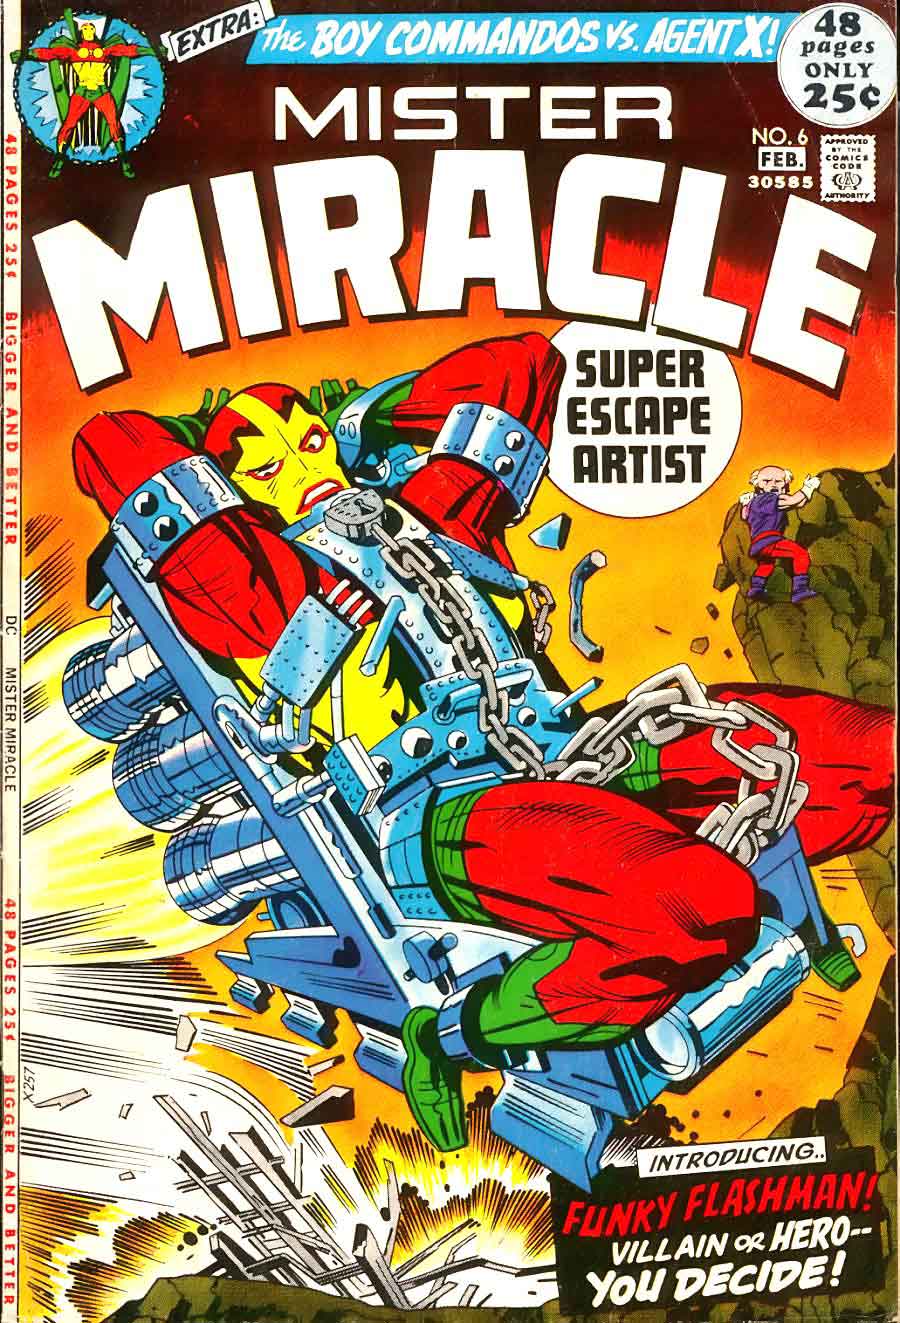 Mister Miracle v1 #6 dc 1970s bronze age comic book cover art by Jack Kirby